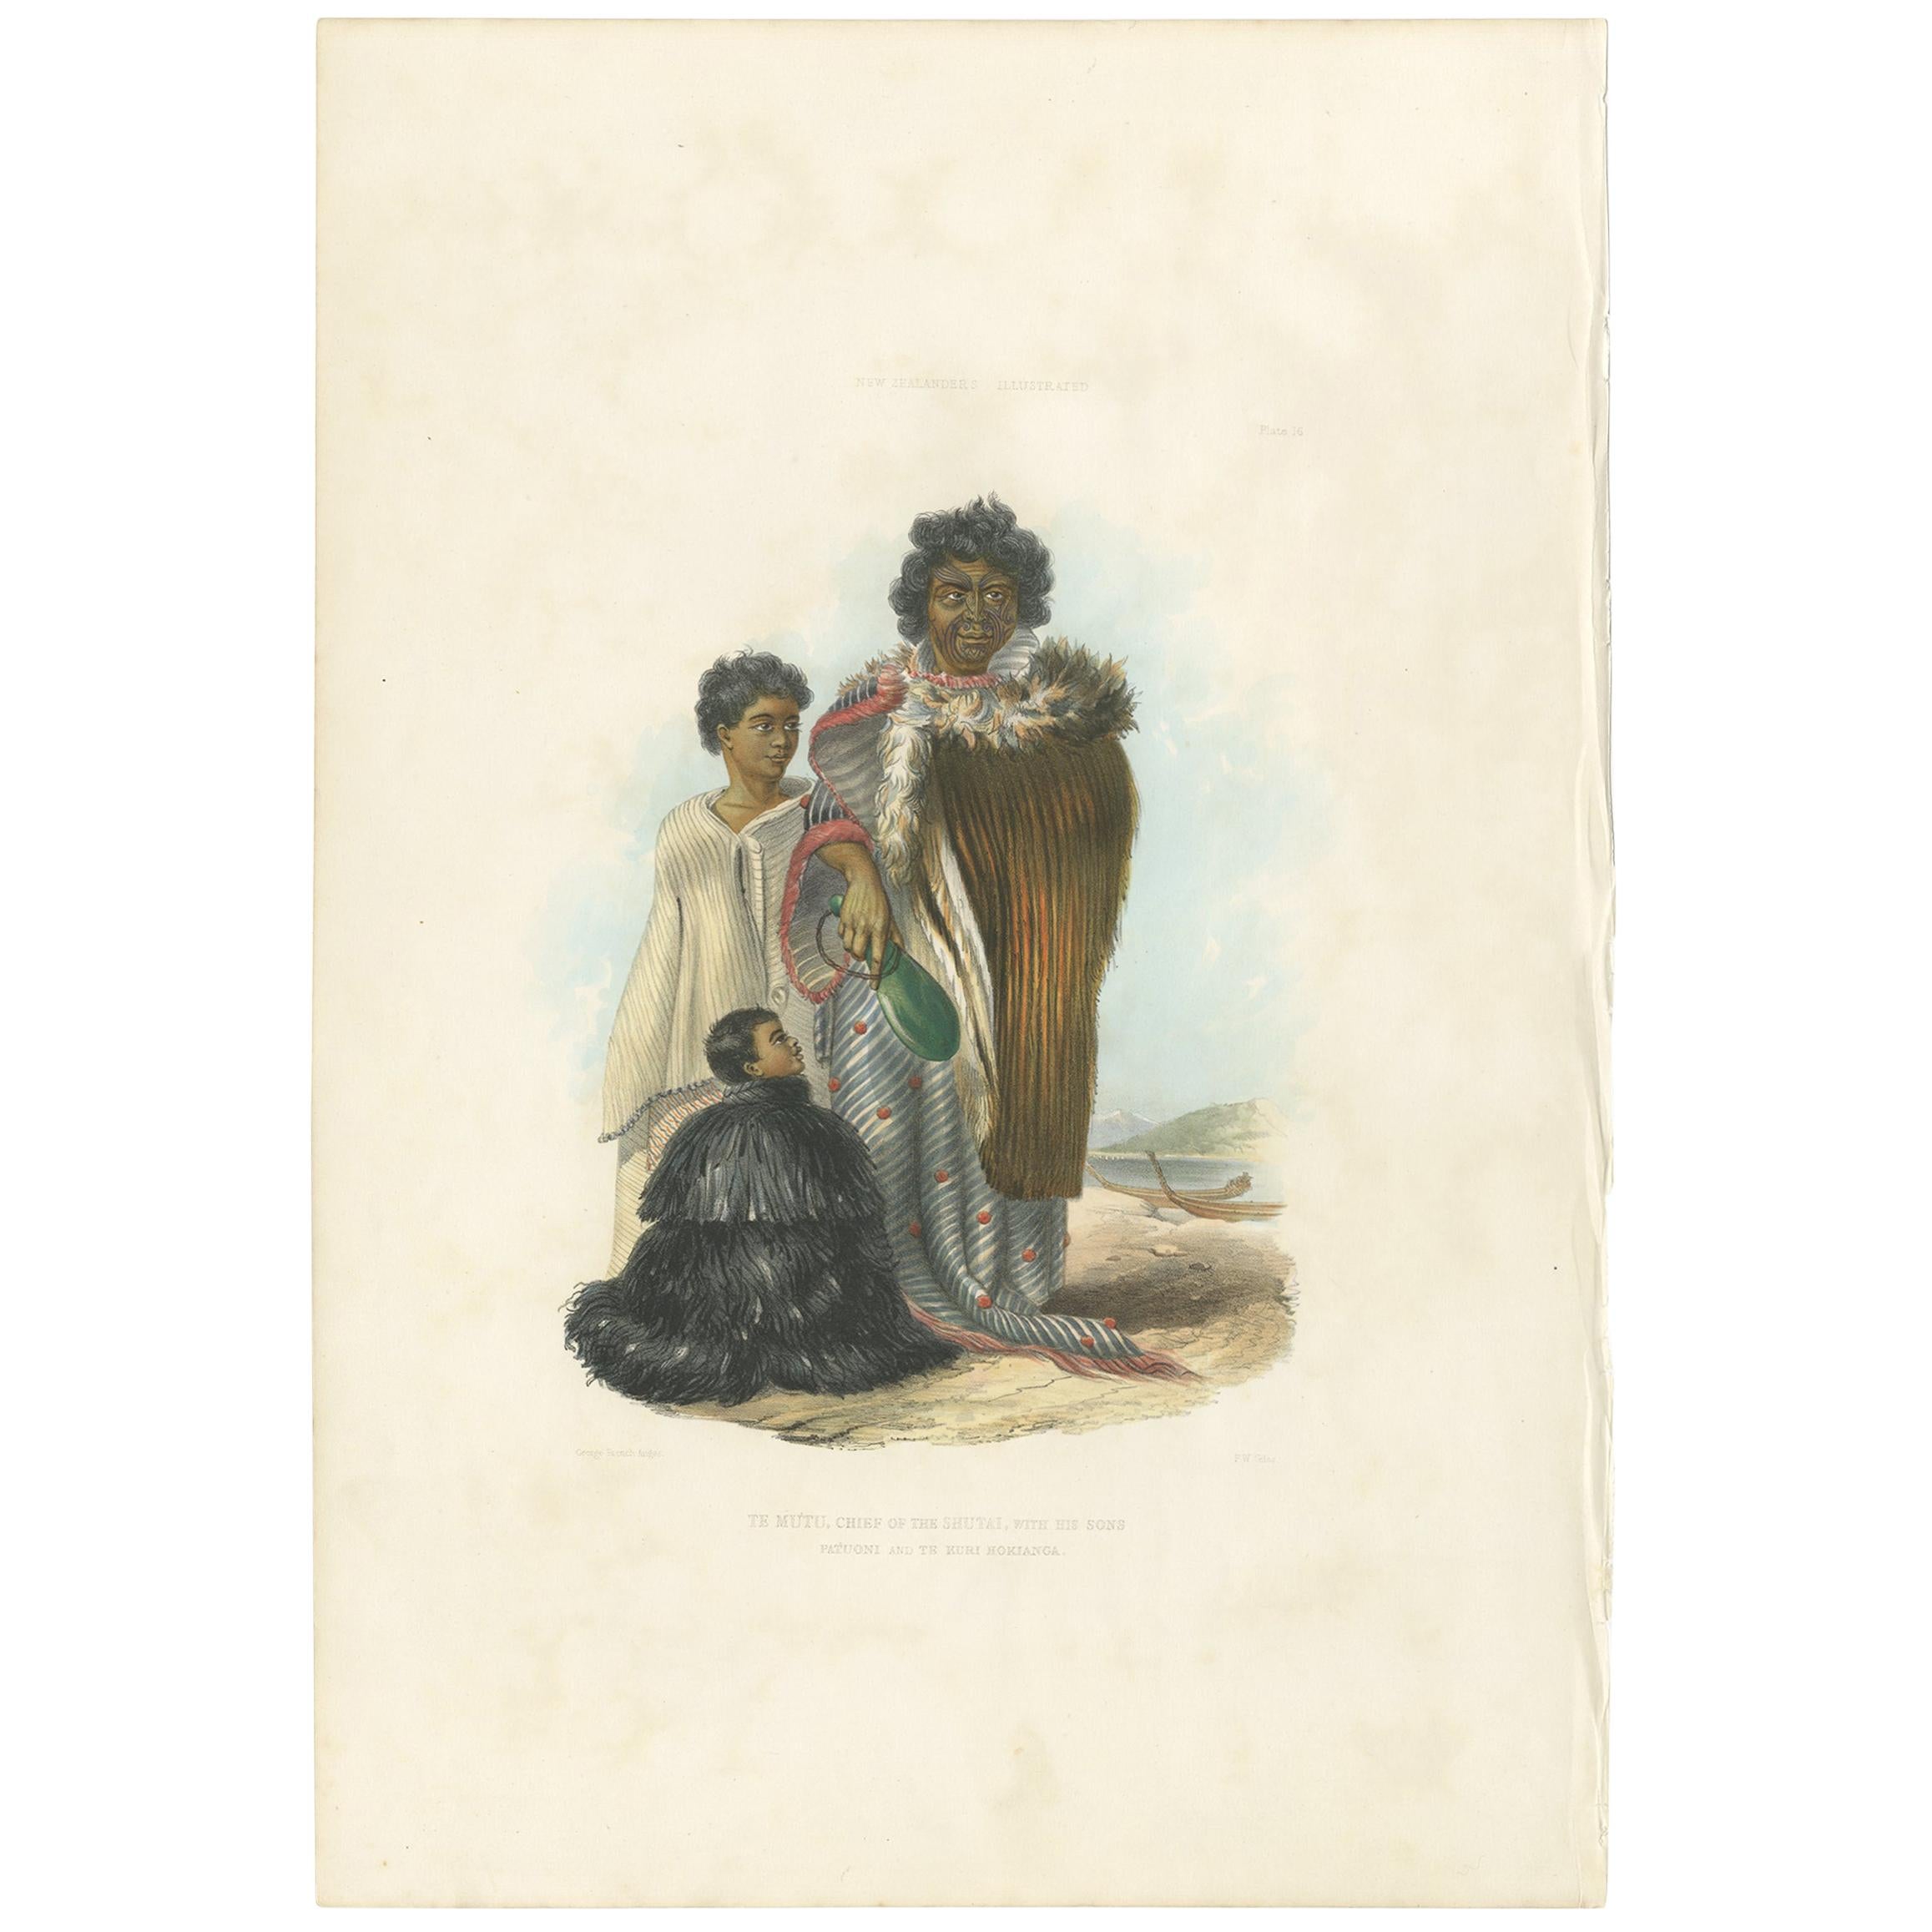 Antique Print of Te Mutu with His Sons by Angas, 1847